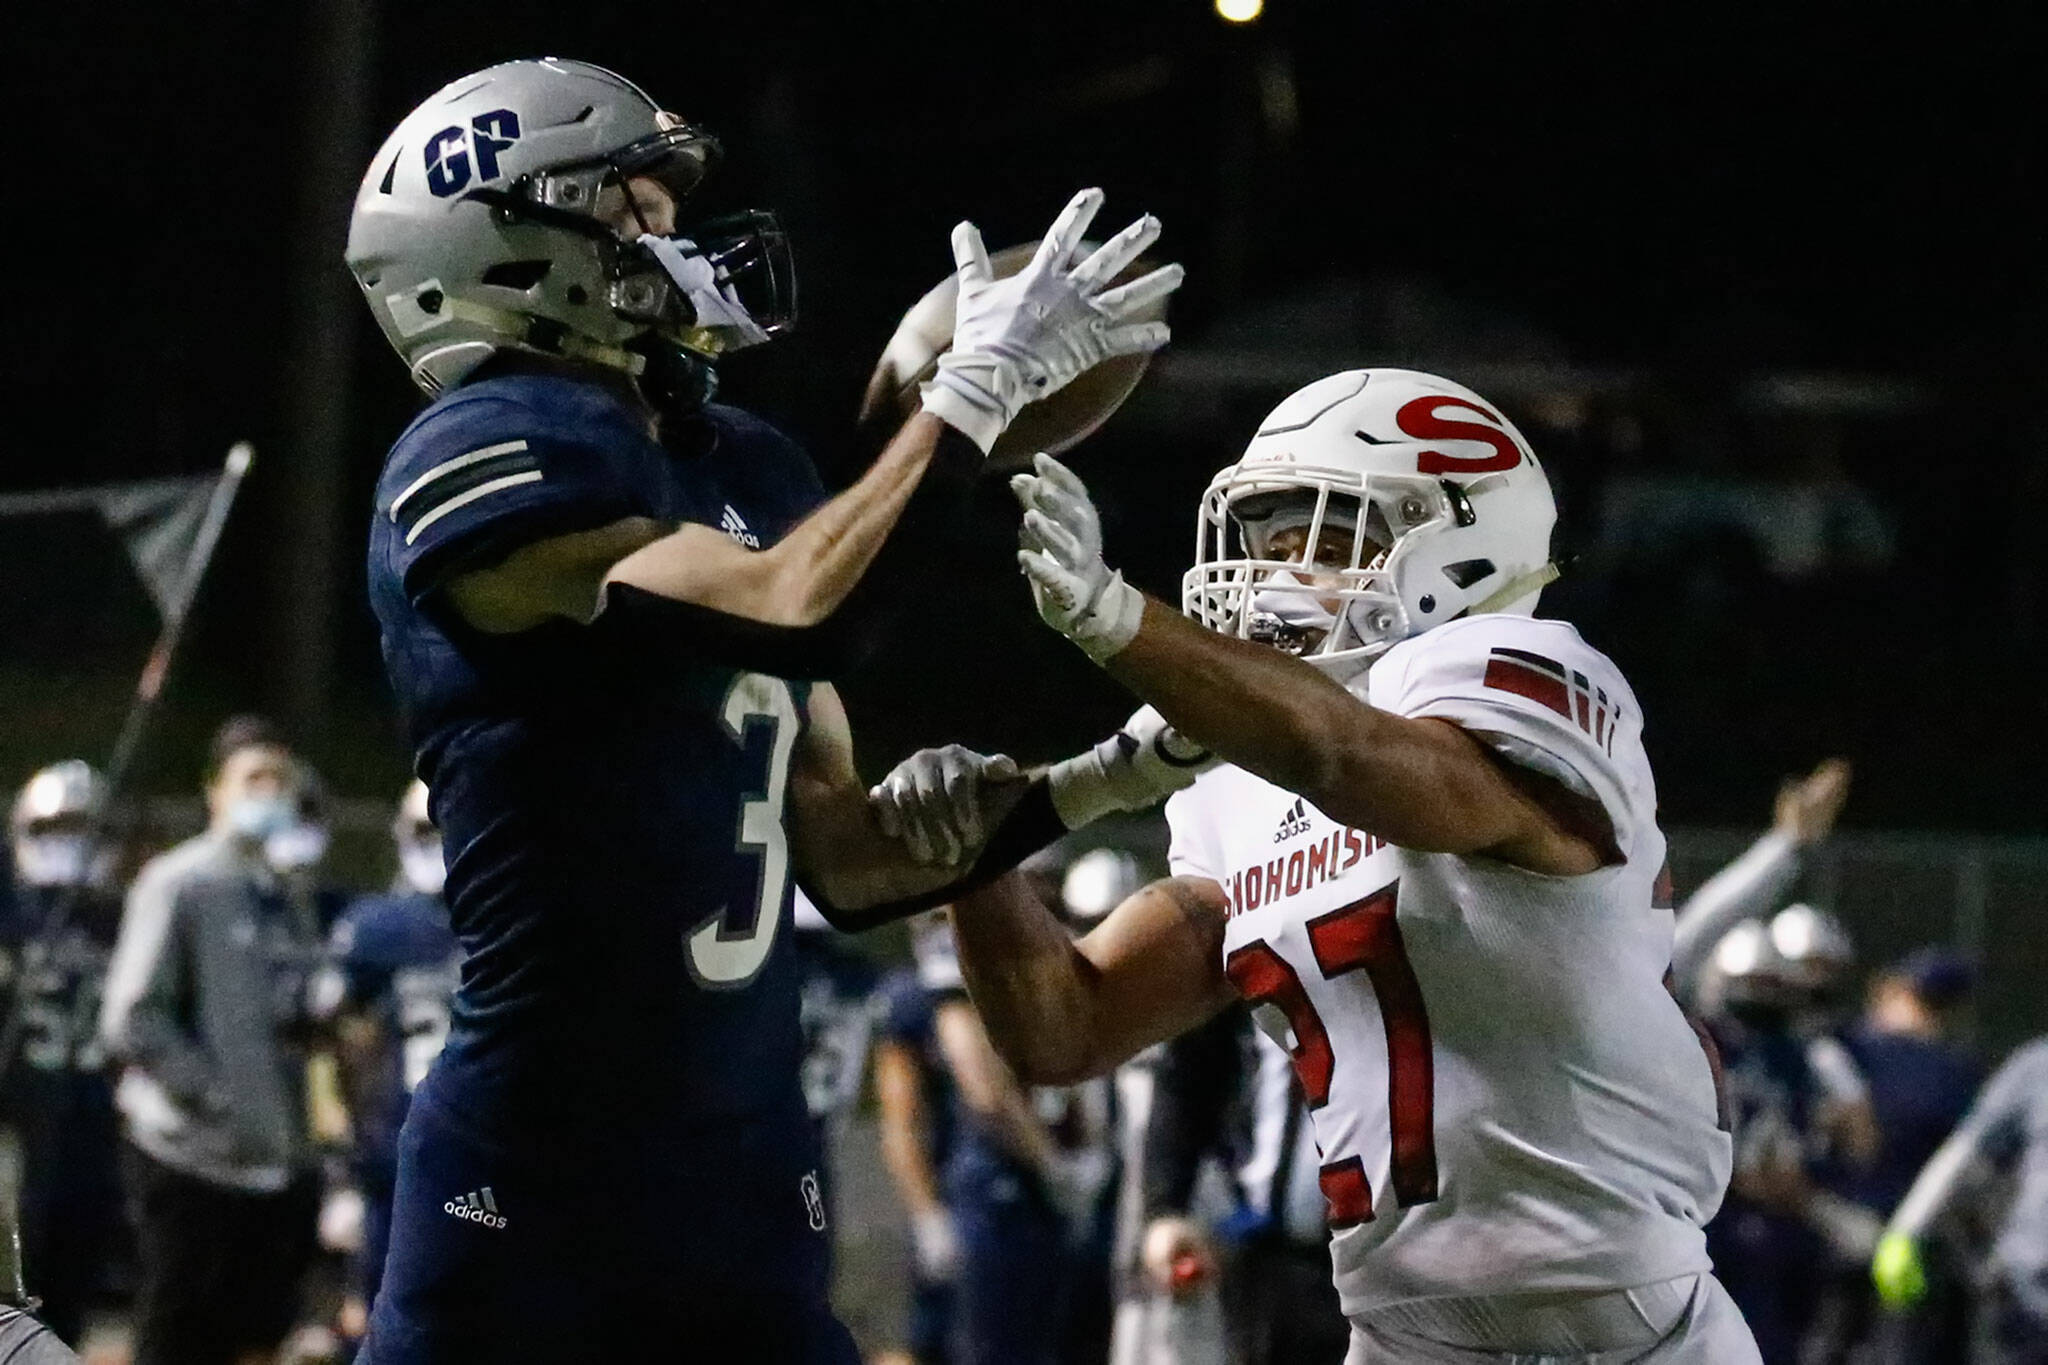 Ashton Olson (left) and Glacier Peak look to continue their dominance of crosstown rival Snohomish on Friday night. (Kevin Clark / The Herald)